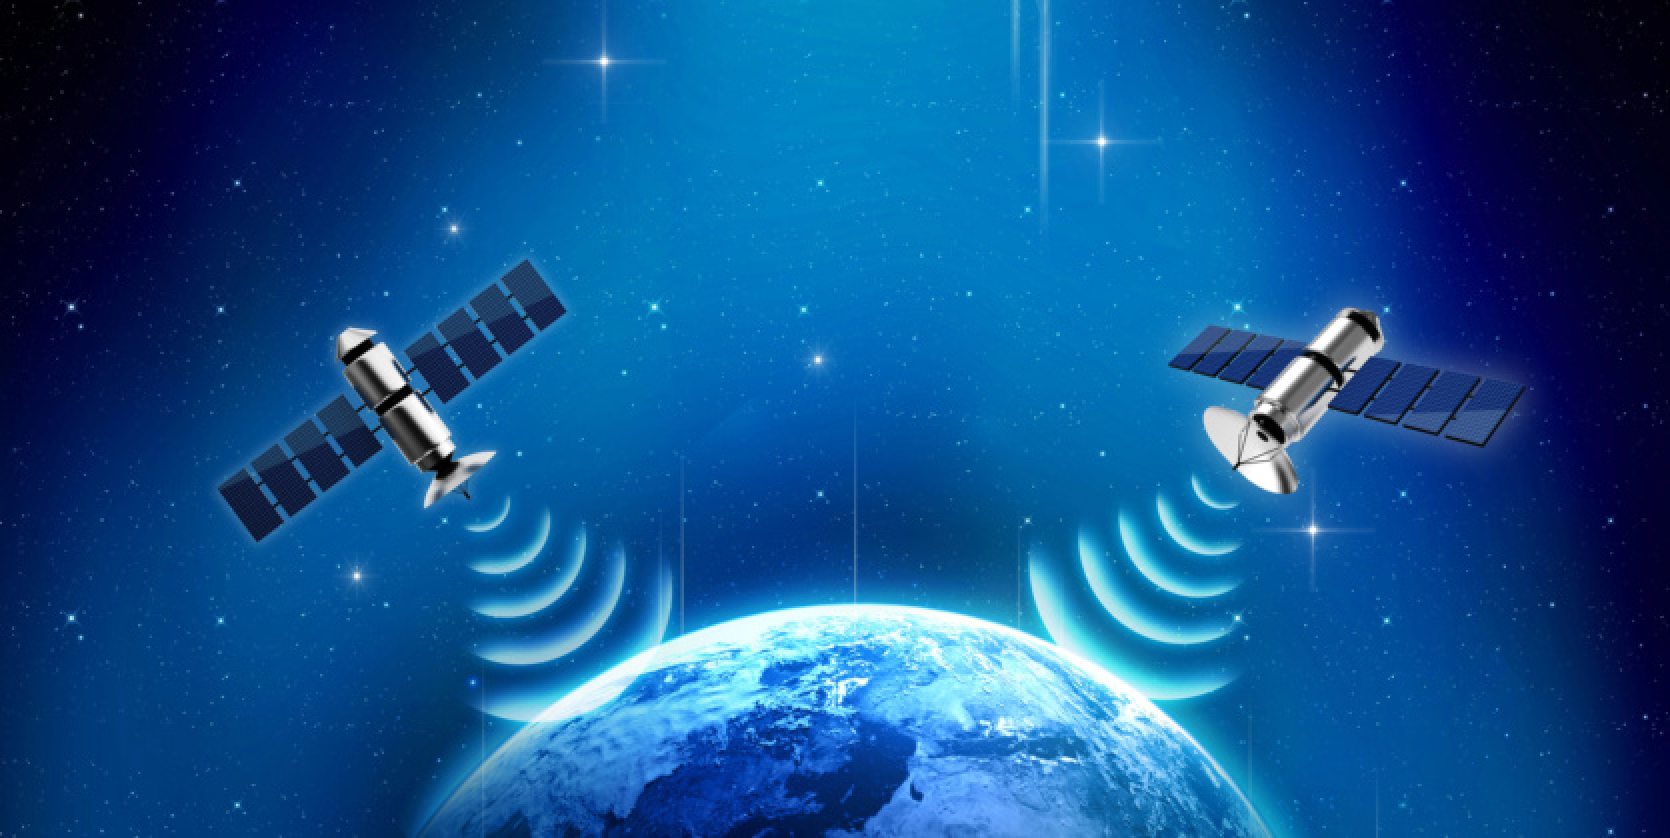 Hubble Network has established the first-ever Bluetooth connection with a satellite